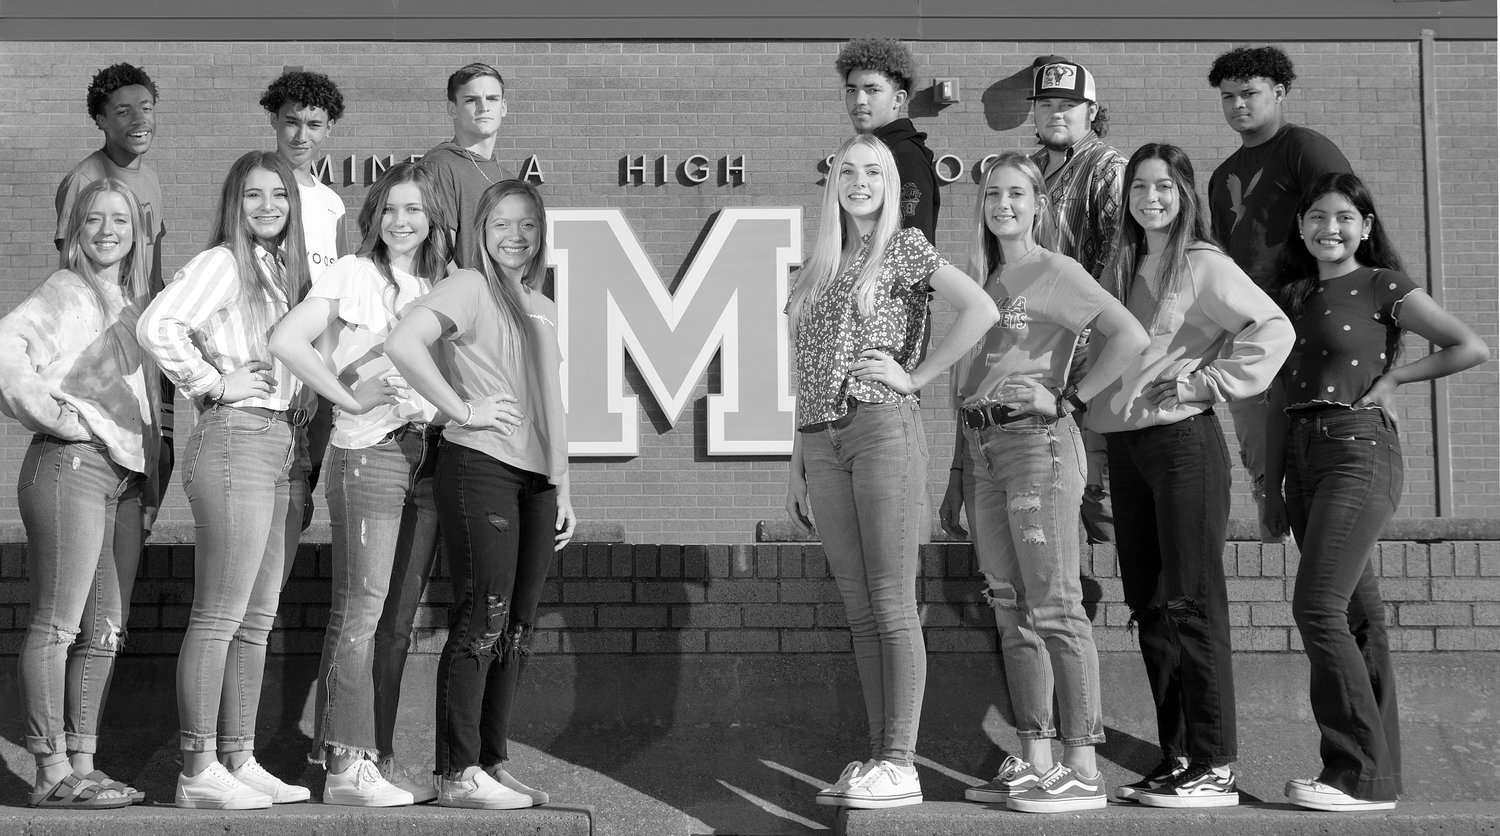 Mineola High School homecoming is Friday, Oct. 22 as the Yellowjackets take on Howe at 7:30 p.m. at Meredith Memorial Stadium. MHS will crown a homecoming king for the first time, in addition to a queen. King’s court and nominees are, back from left, freshman duke Xzavien Lipscomb, sophomore duke Trenton Seely and king nominees Coy Anderson, Jaxon Holland, Justin Crump and Nathaniel Griffin. Not pictured are junior duke Jett Vaughan and king nominee Dee Elshehaby. Queen’s court and nominees are, front from left, freshman duchess Sarah Smith, sophomore duchess Valerie Moreland, junior duchess Allison Hooton and queen nominees Riley Weekly, Rebecca Hughes, Hannah Zoch, Keilee Riley and Michelle Hernandez. The homecoming parade is Friday at 3 p.m. from Graham St. to the Church of Christ along Hwy. 80.